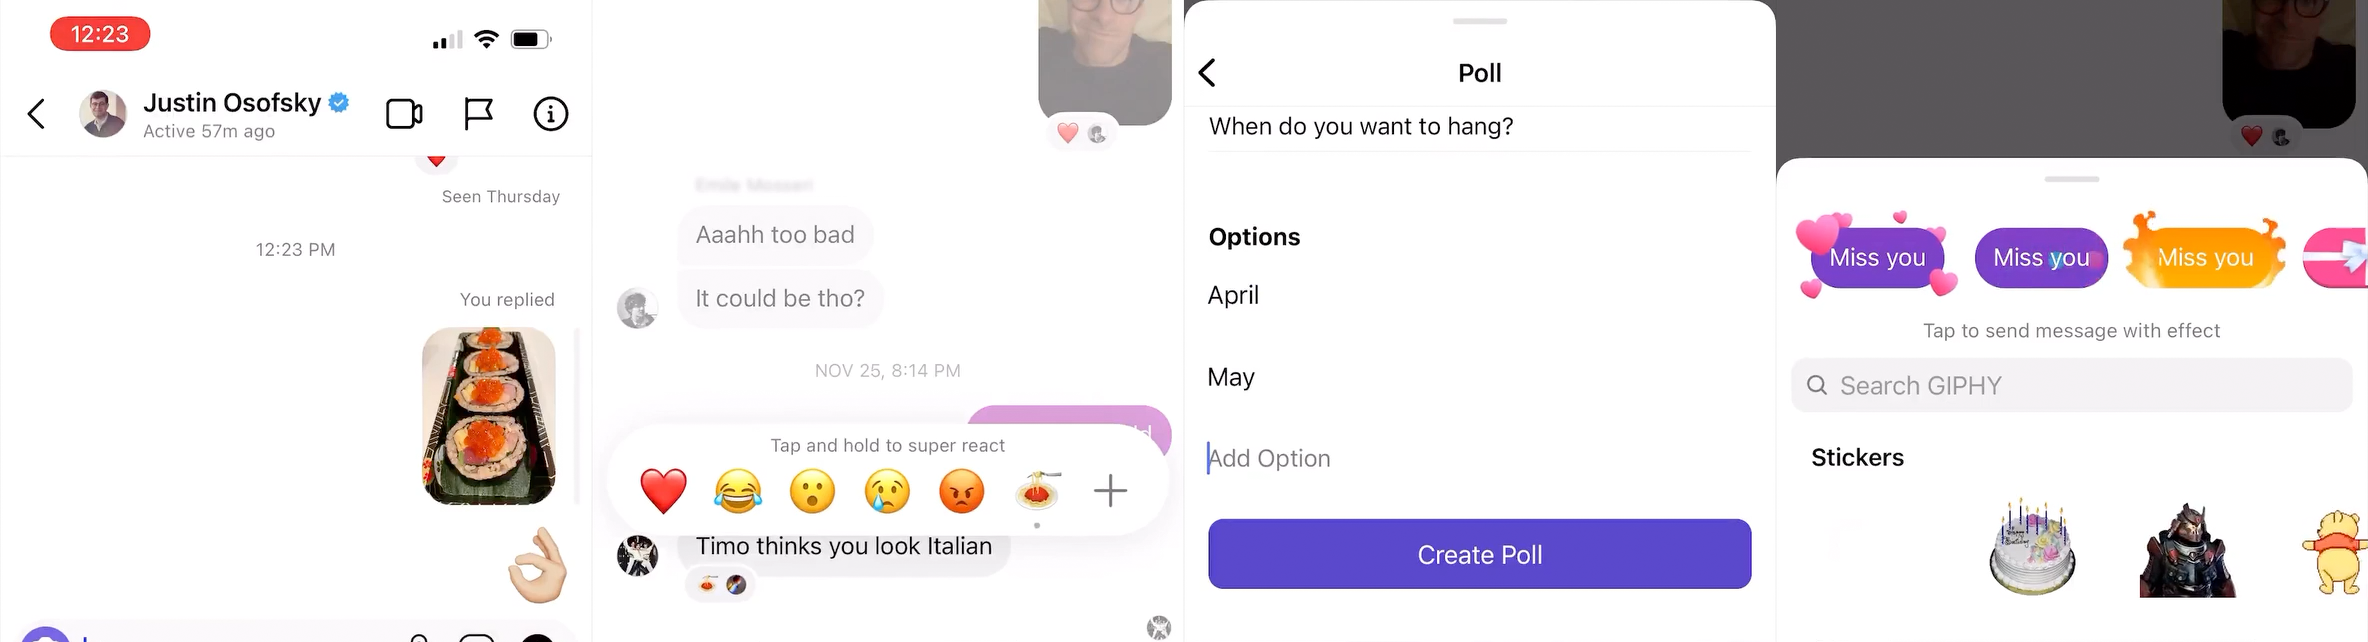 Instagram highlight some of the new features on Messenger